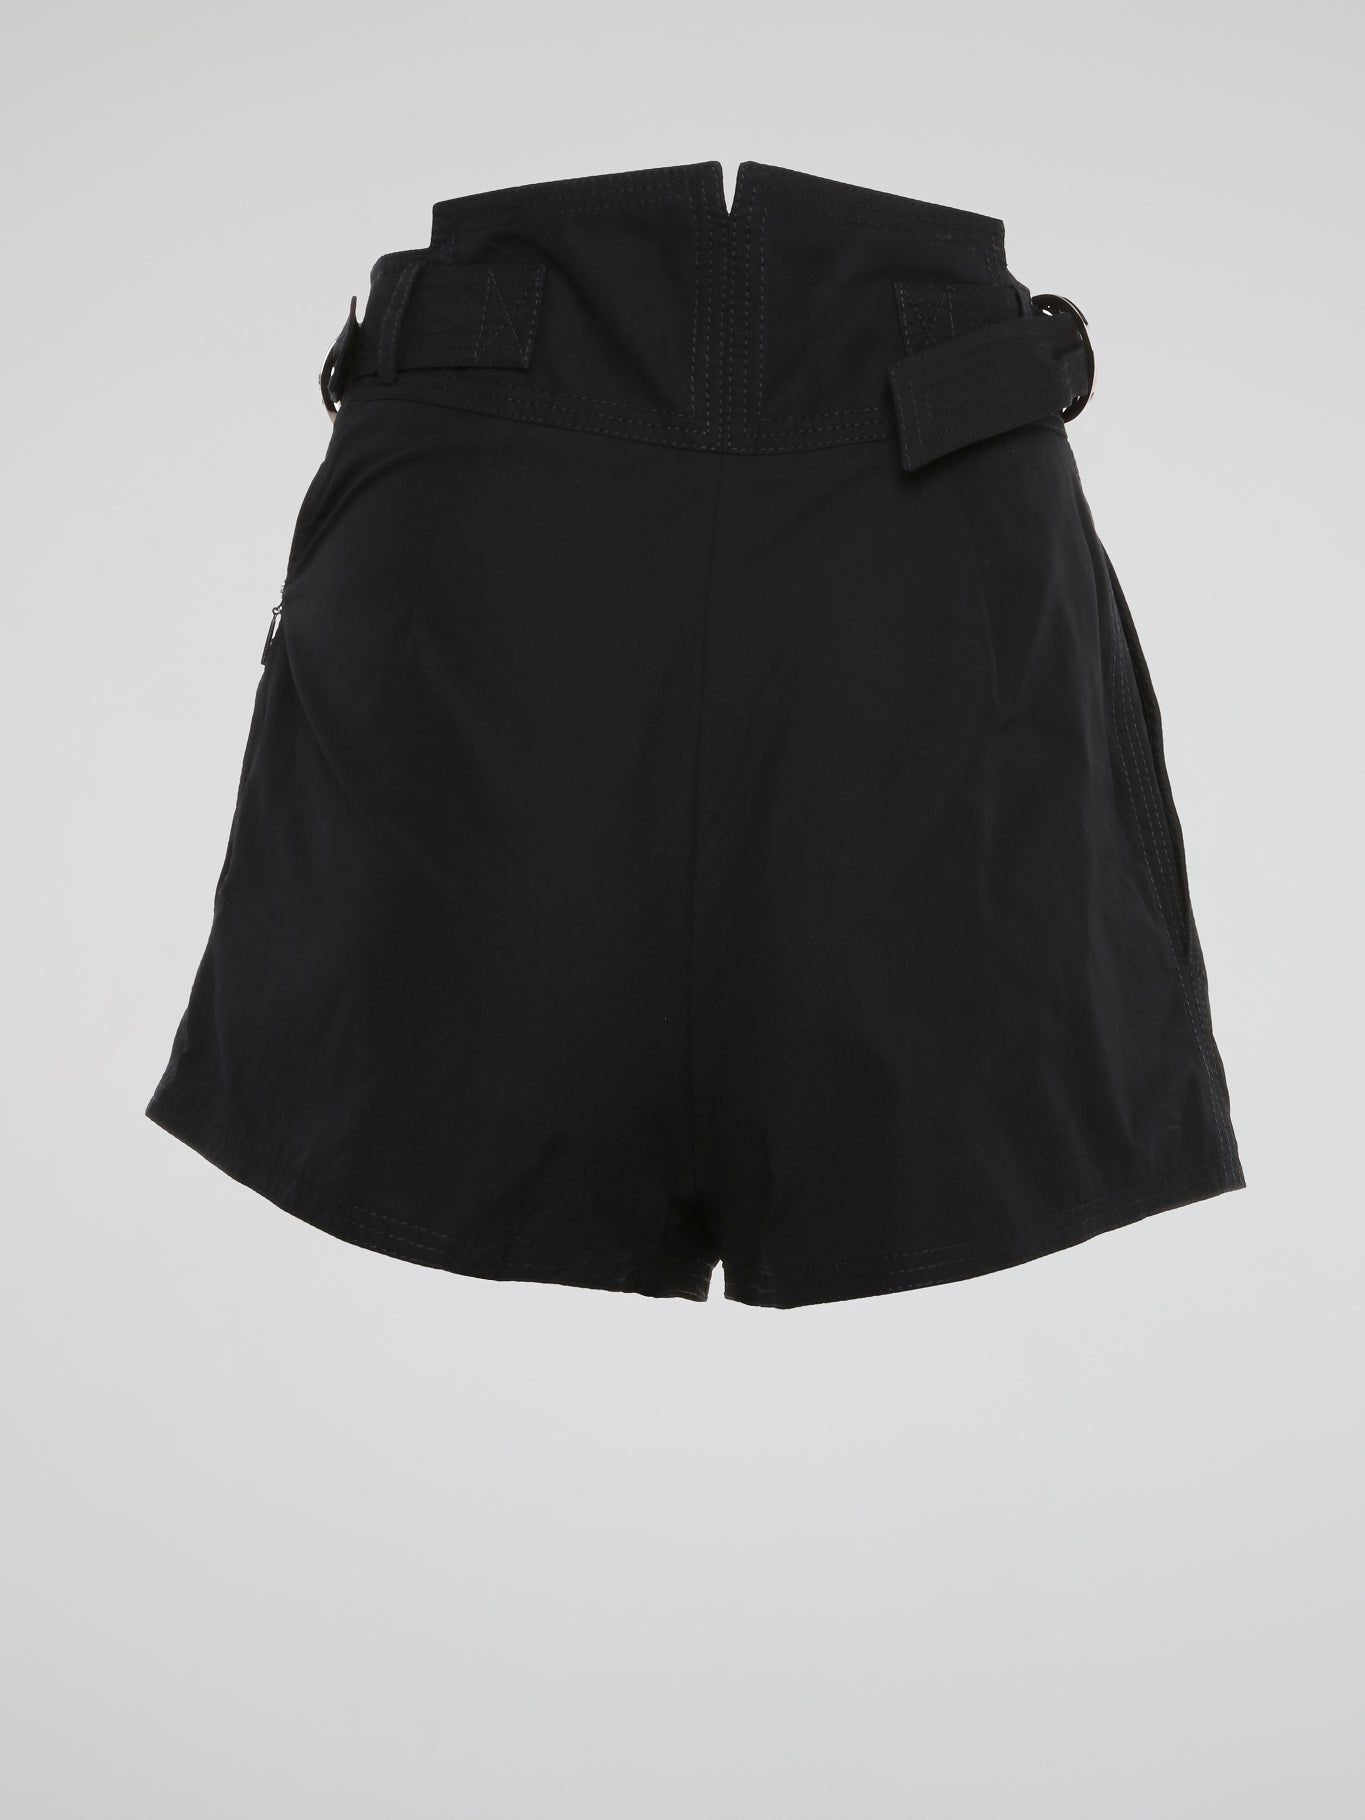 Elevate your casual style with our Black Cargo Shorts by Roberto Cavalli, designed for the modern man who values comfort and sophistication. Made with high-quality fabric and attention to detail, these shorts are perfect for everyday wear or a weekend getaway. Stand out from the crowd and make a statement with your fashion choices in these versatile and stylish cargo shorts.